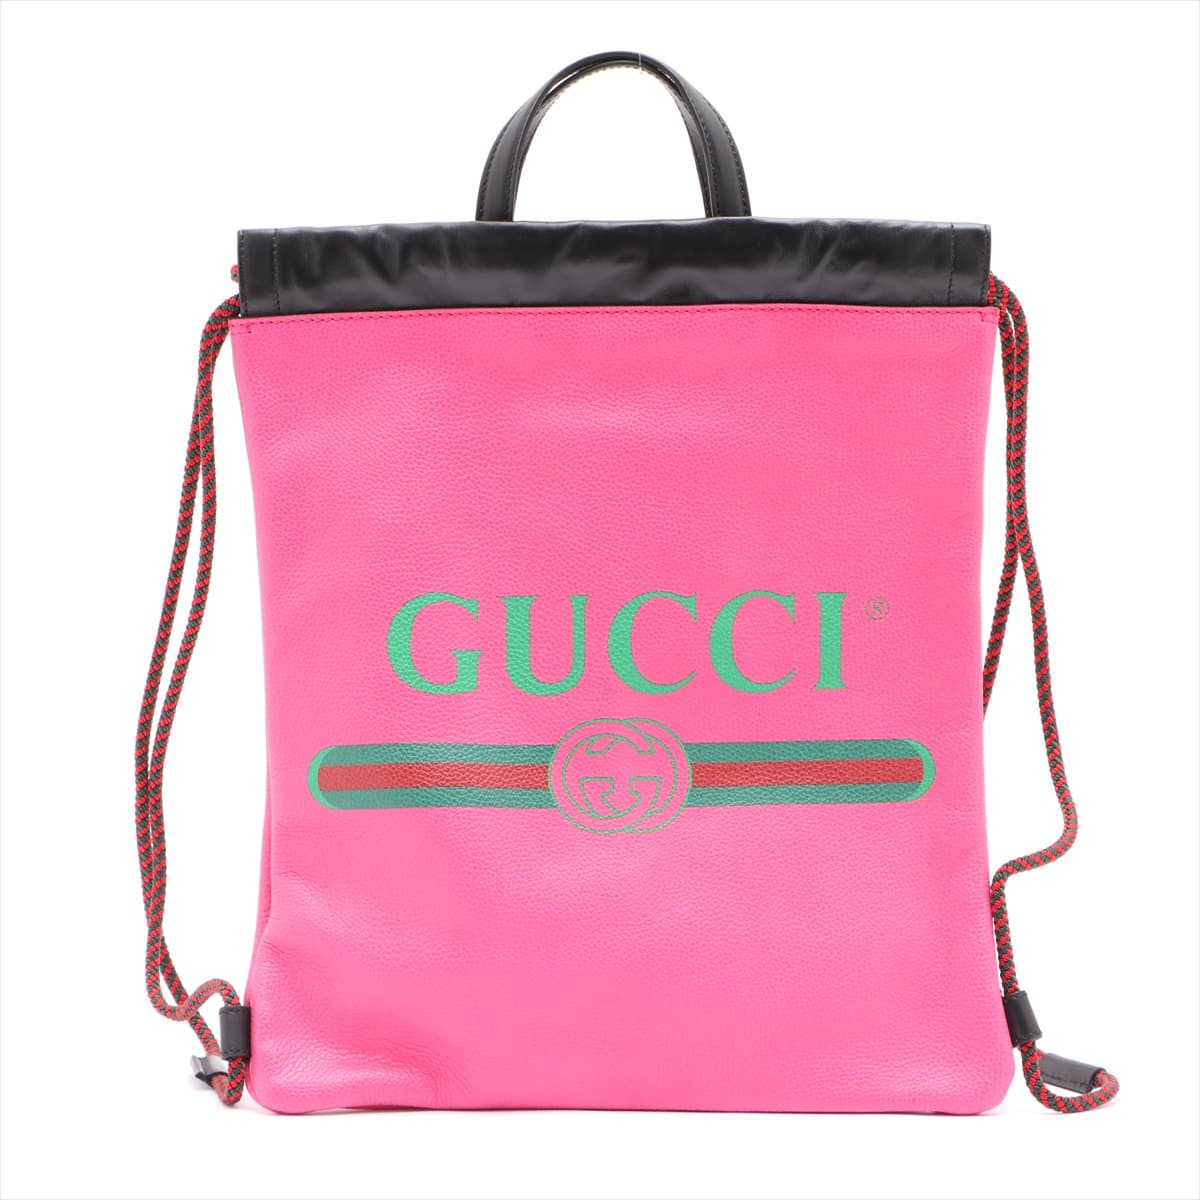 Gucci Logo Print Leather Backpack Pink 523586 with pouch